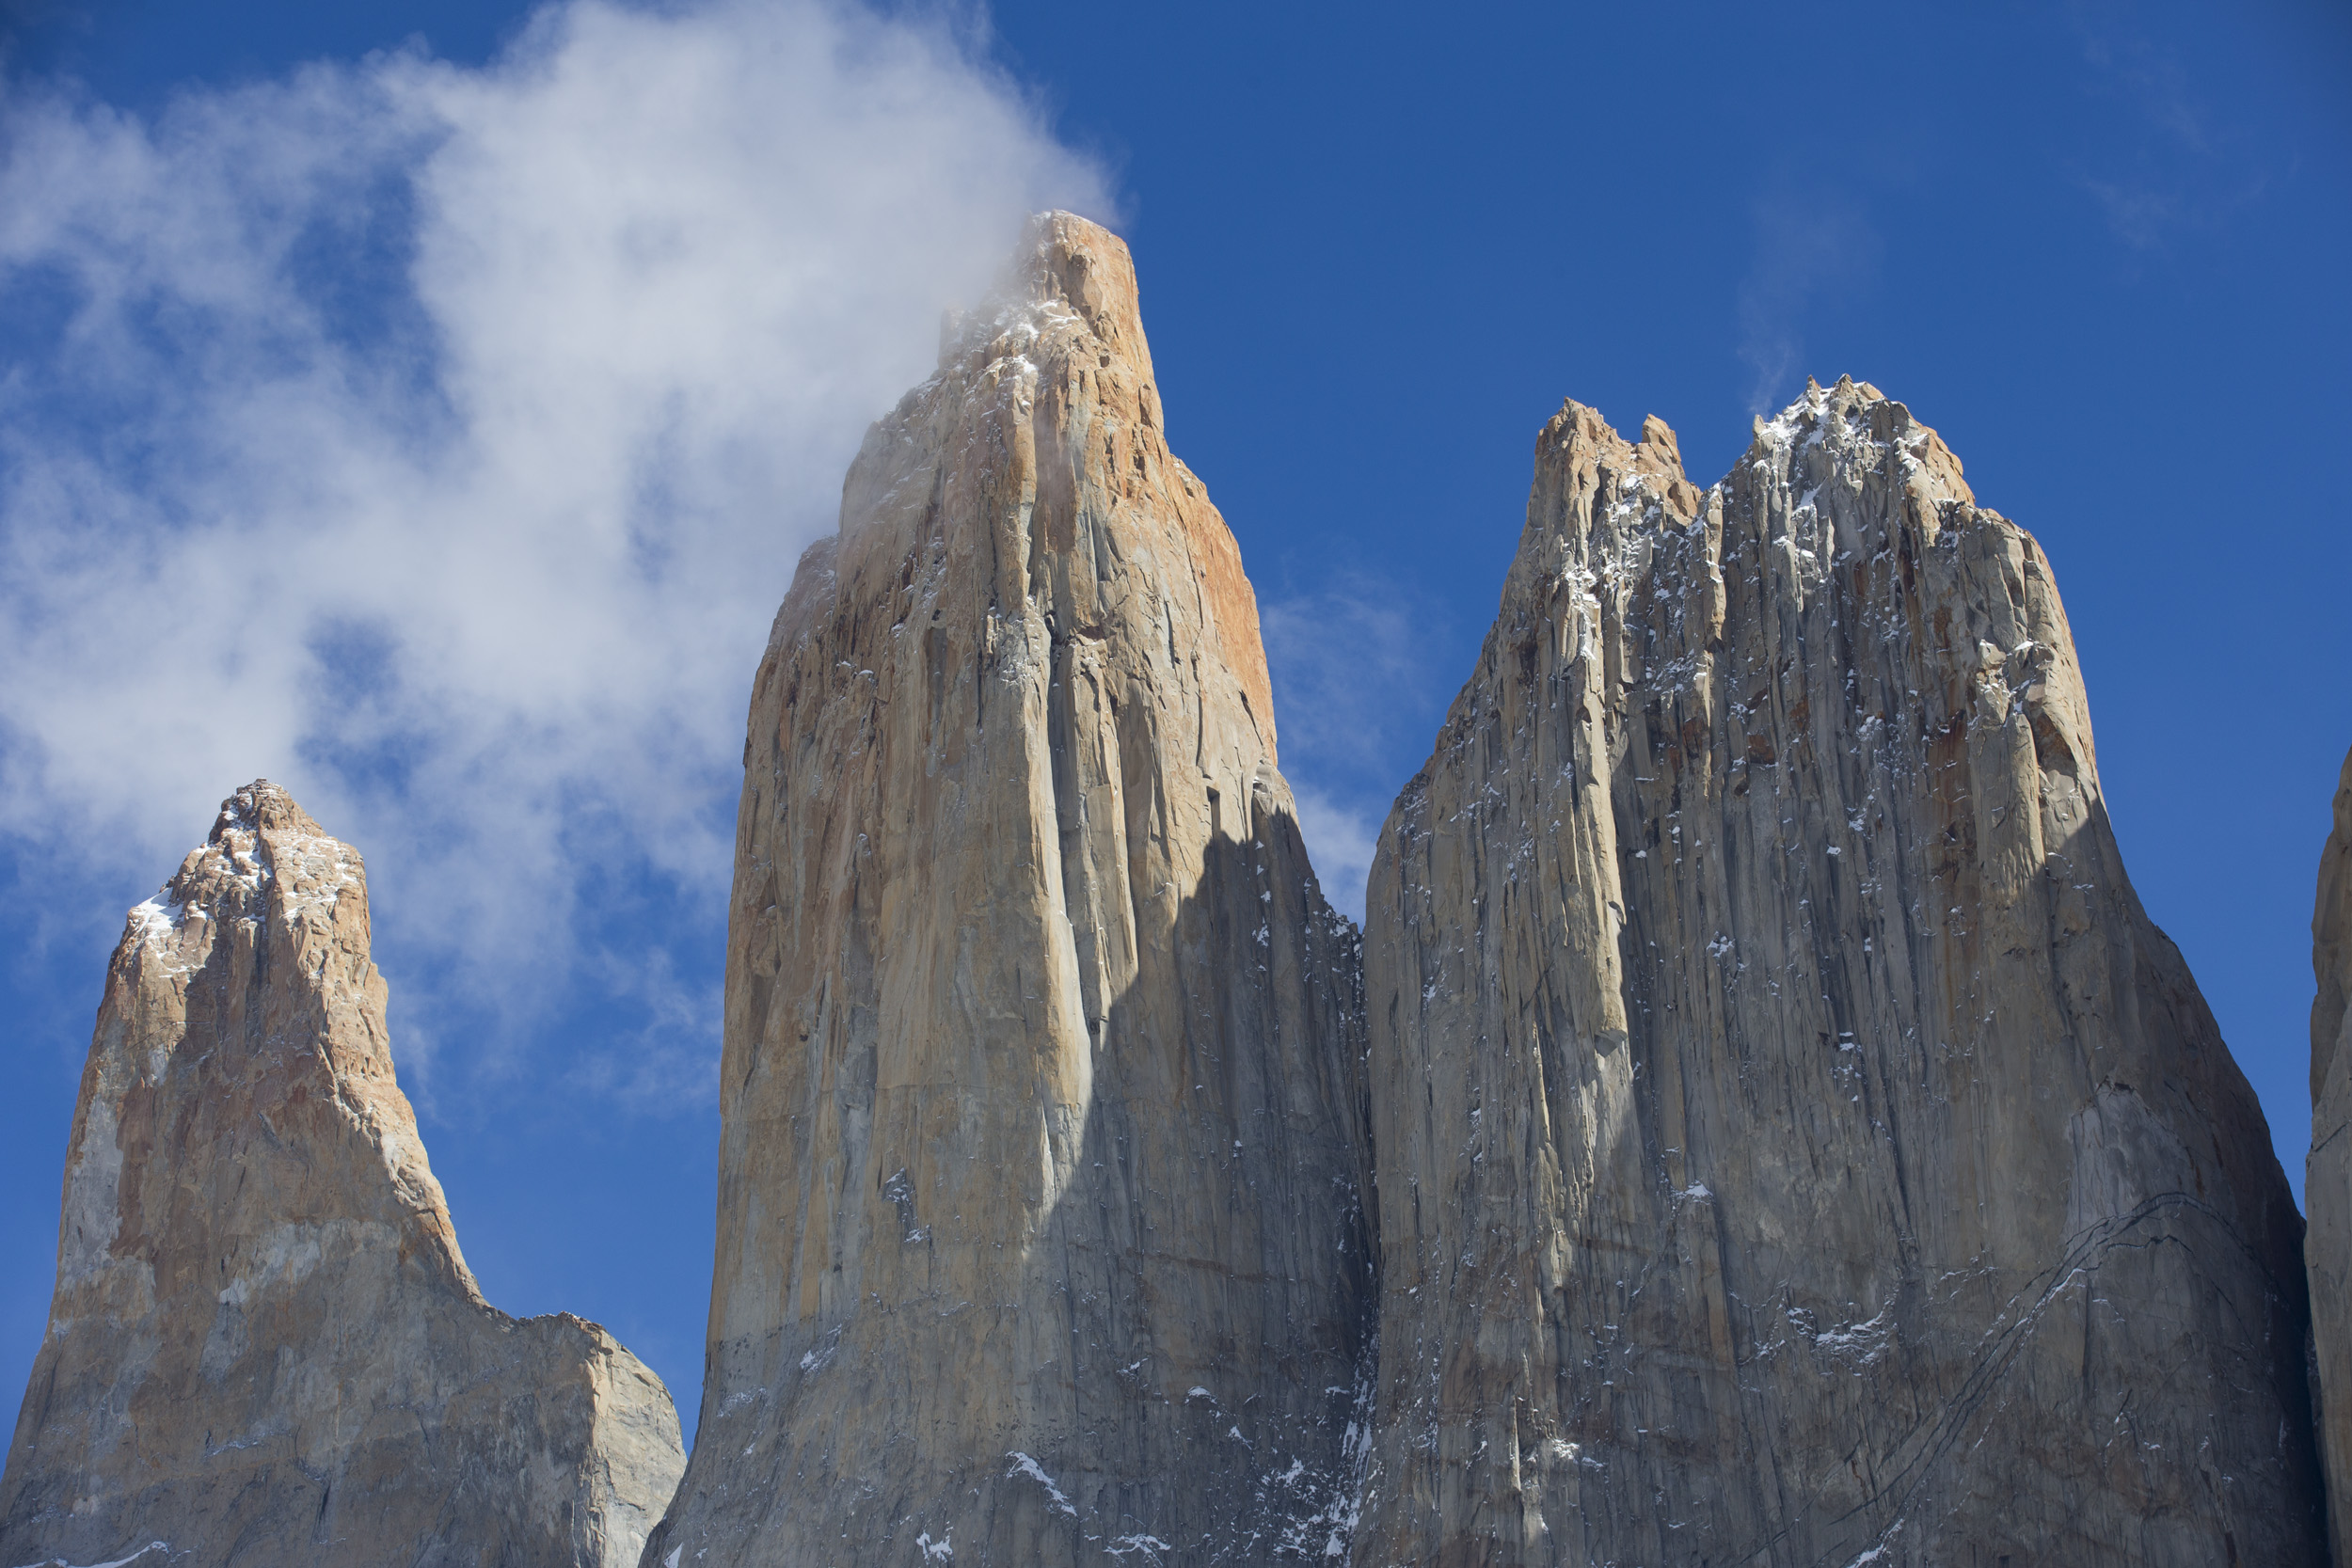 Hiking The Base of the Towers in Torres del Paine